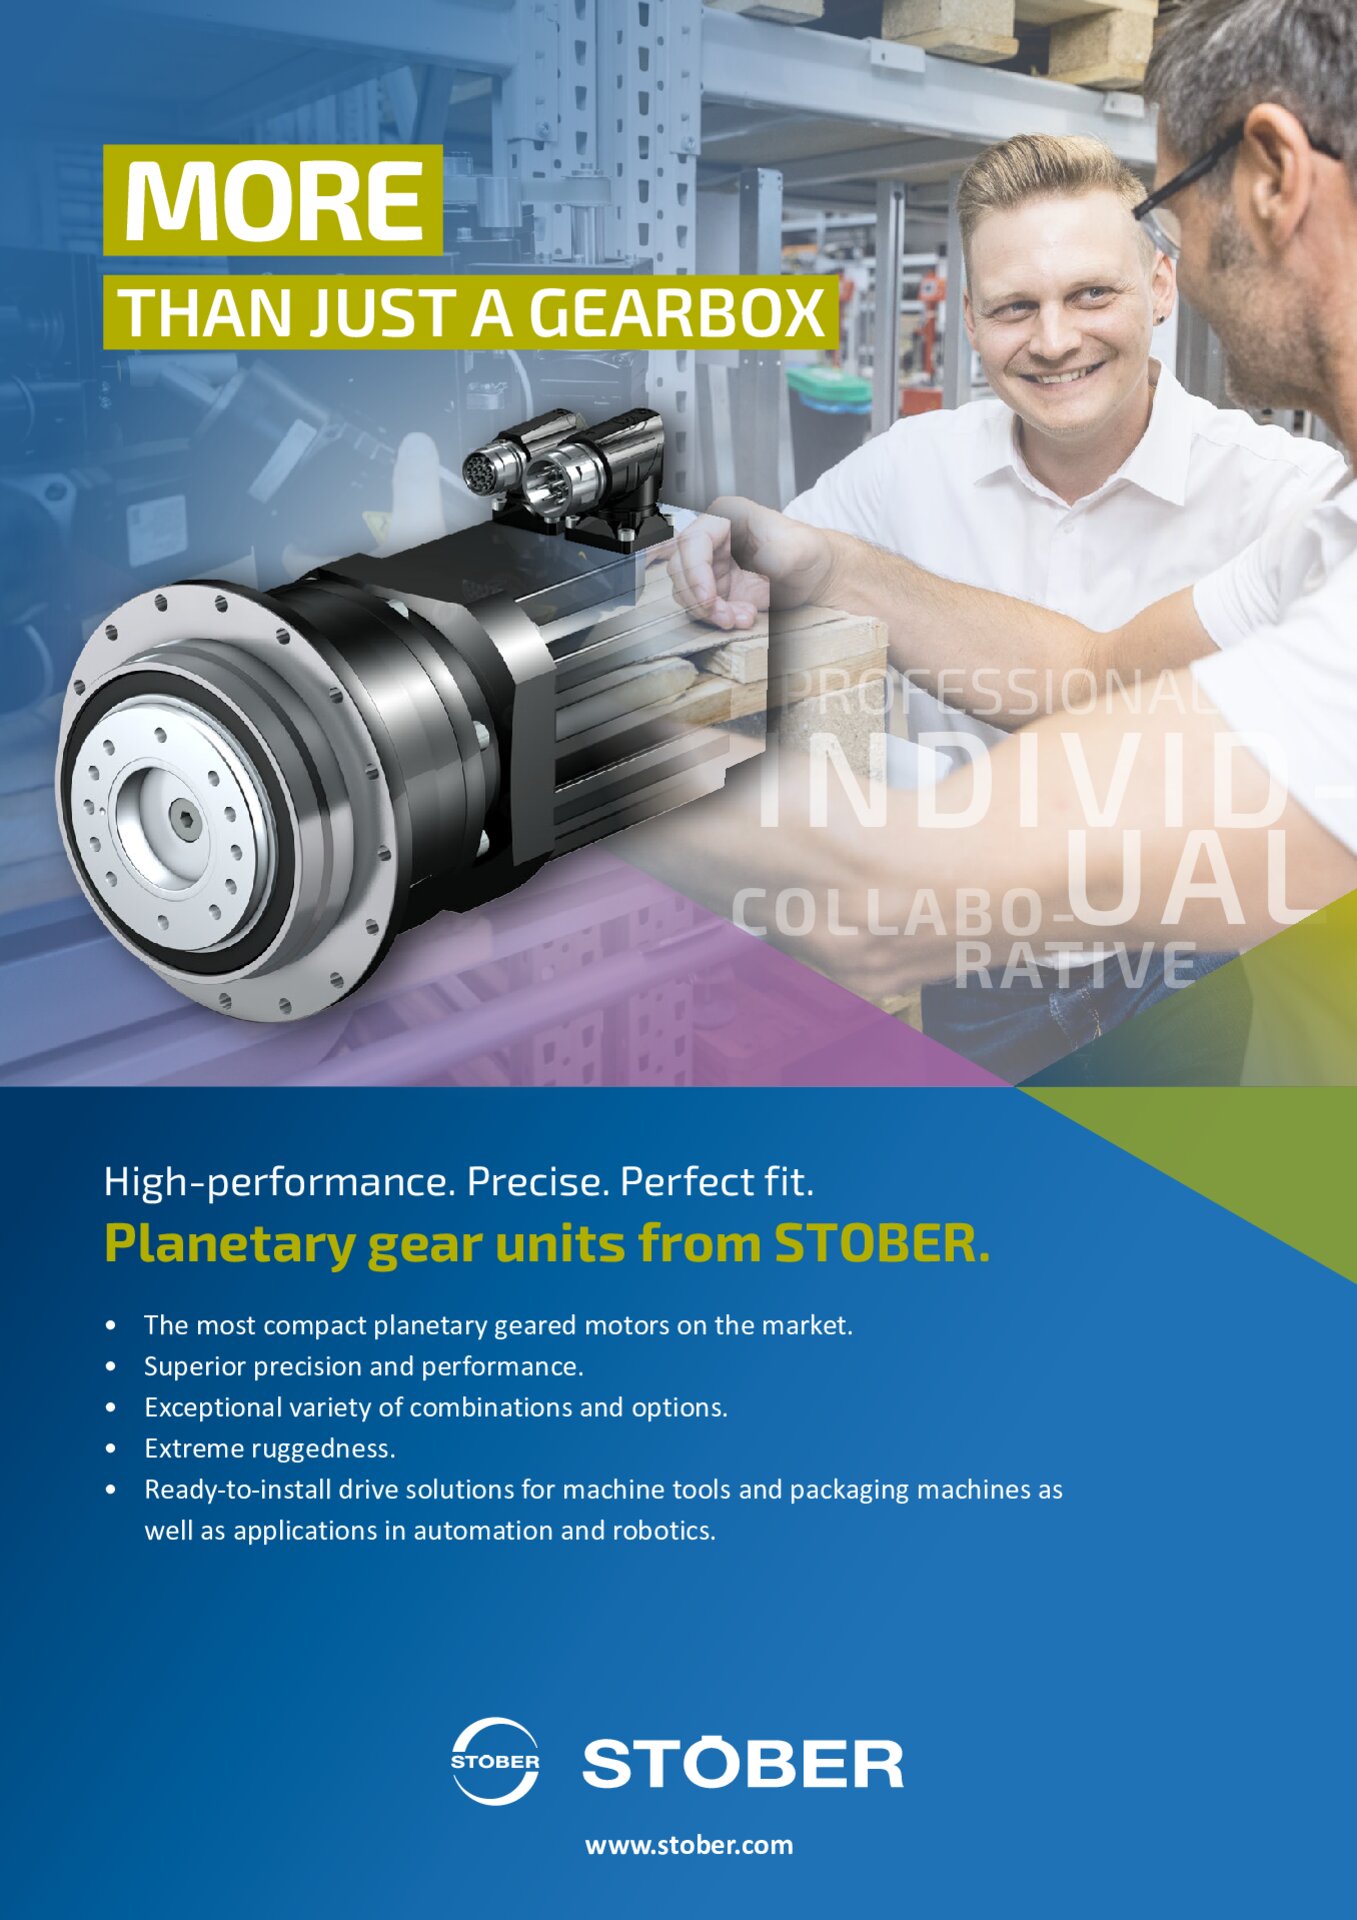 More than just a gearbox